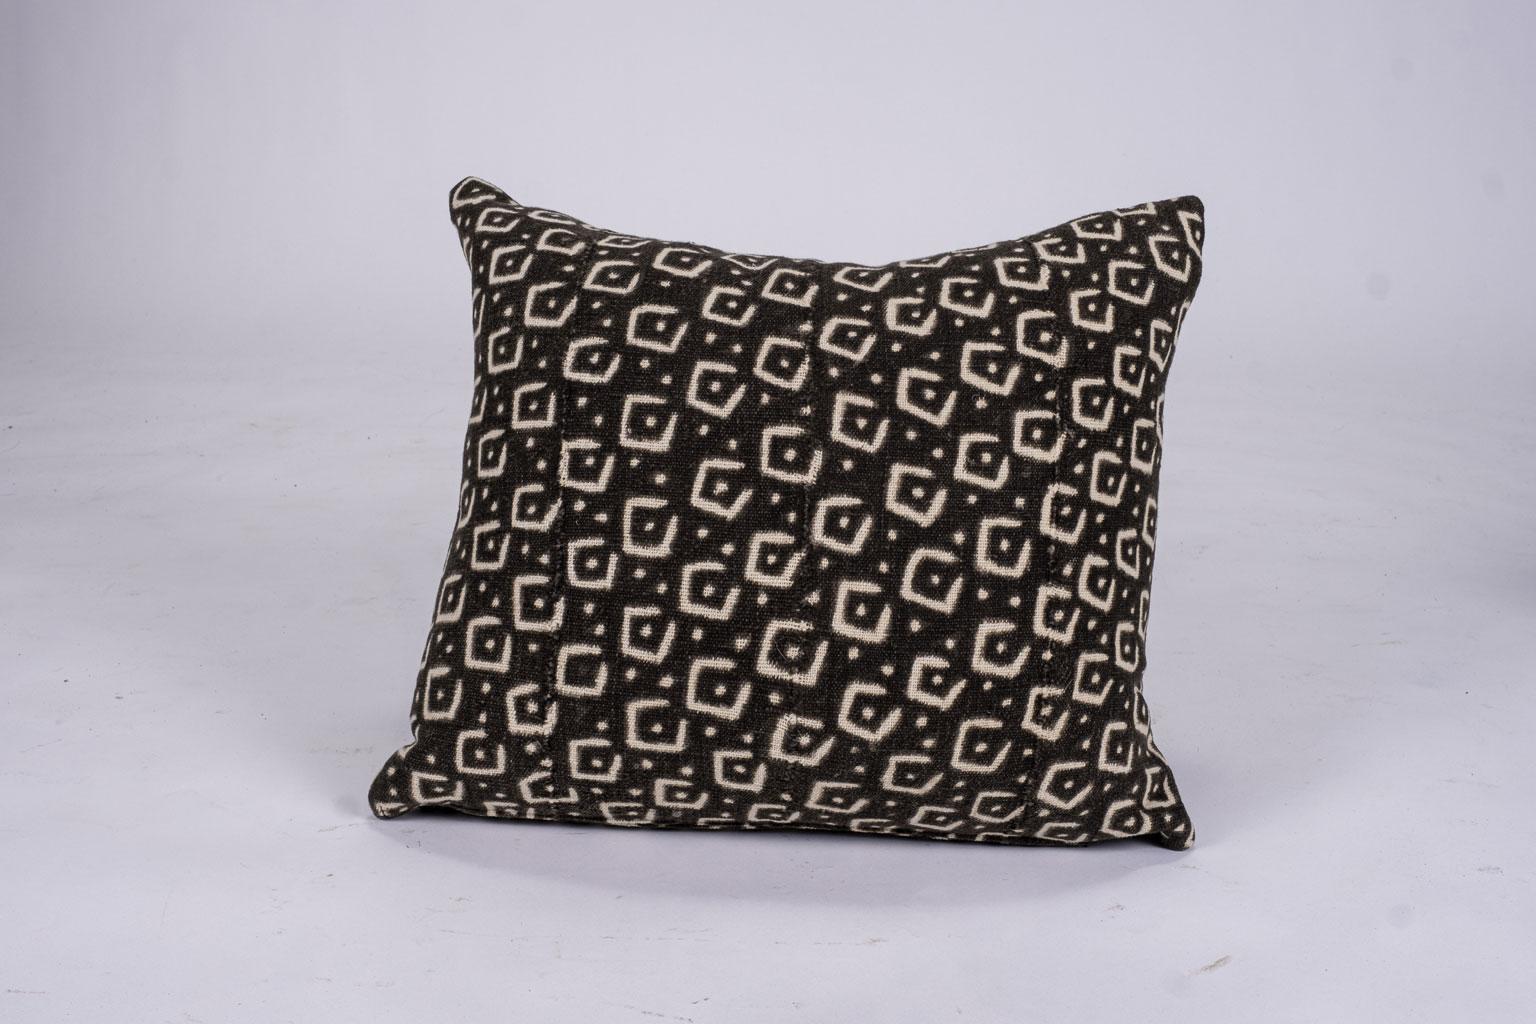 Vegetable Dyed Brown and Beige Tribal Print Cotton Cushion